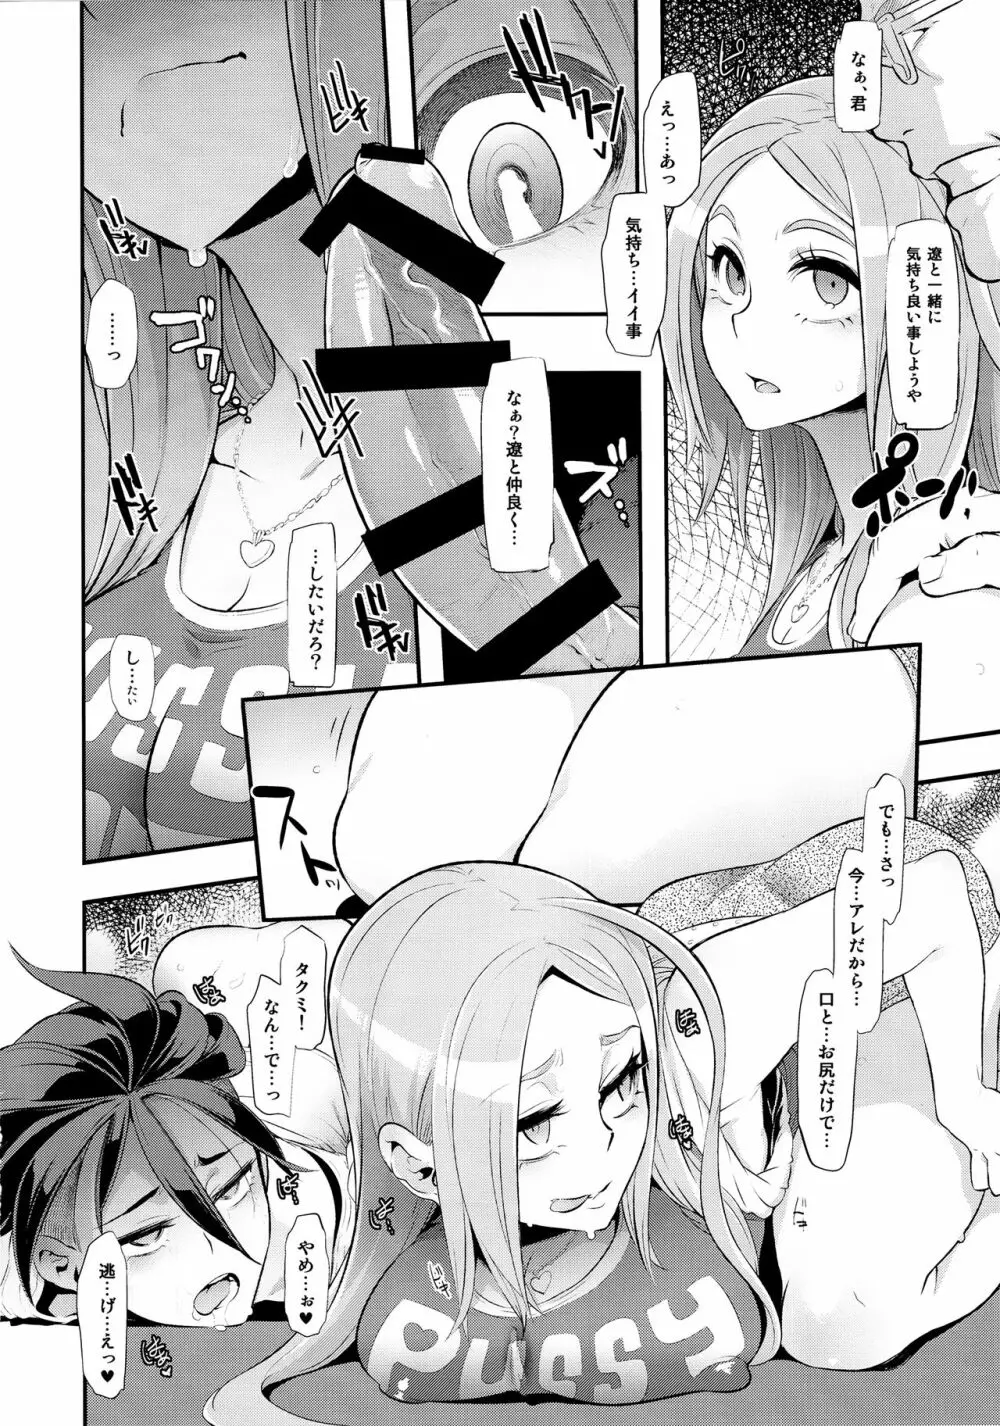 TSF物語 Append 4.0 - page29